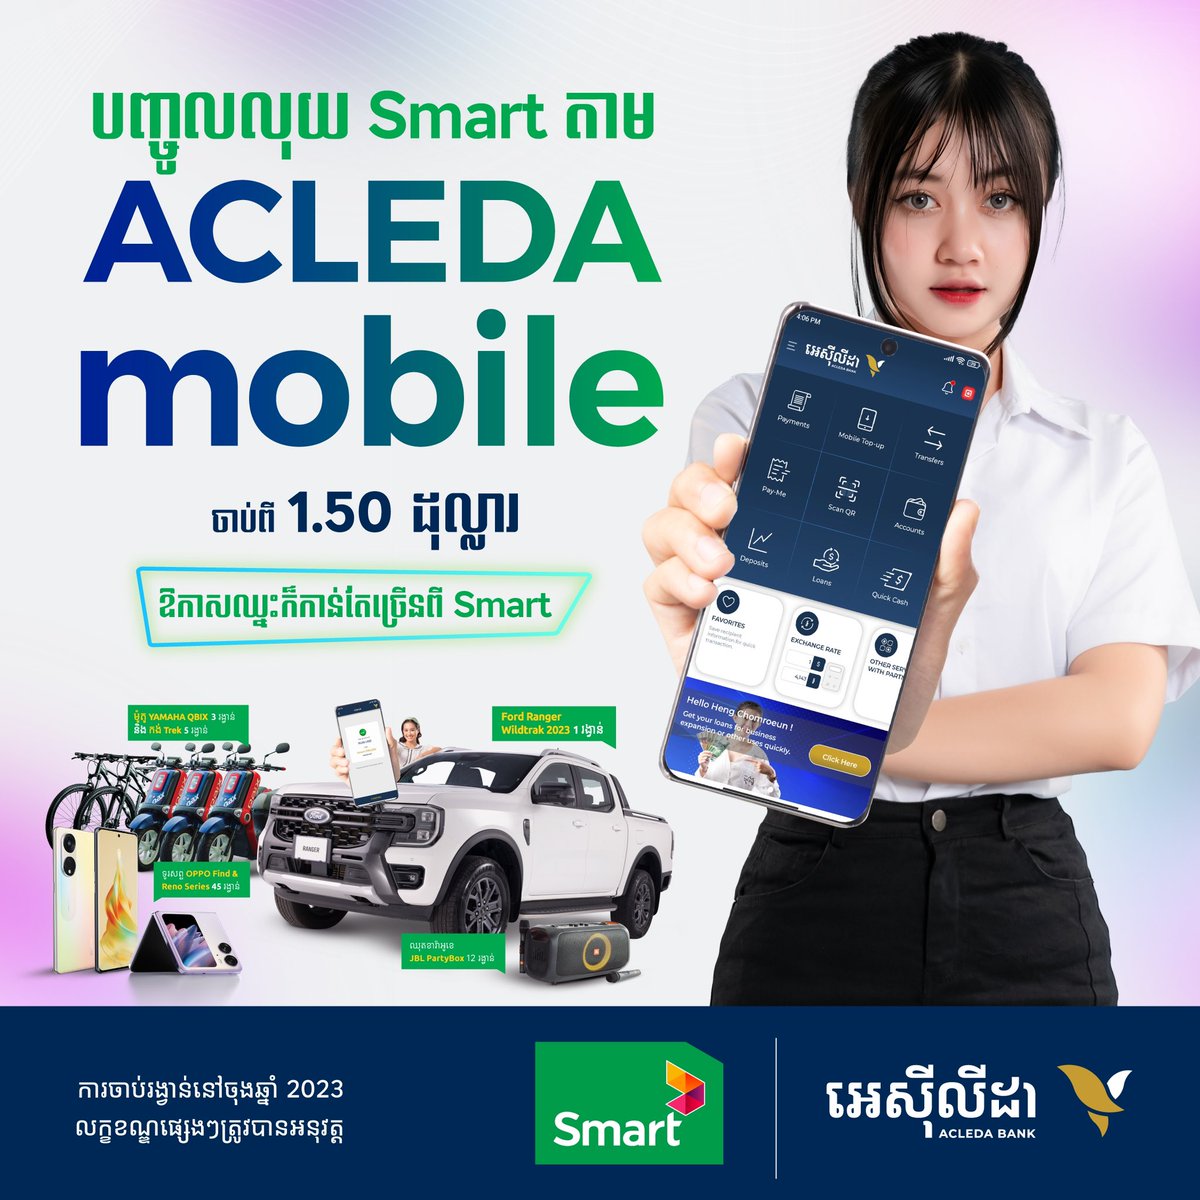 Smart Top Up to WIN! Simply top up your smart number through ACLEDA mobile, ACLEDA Internet, or ATM from 1.50 USD or more​ for your chance to win an amazing prize from Smart.​

Read more: acledabank.com.kh/sl/smart?l=eng​

#ACLEDAmobile #ACLEDAATM #ACLEDAInternetBanking #SmartAxiata